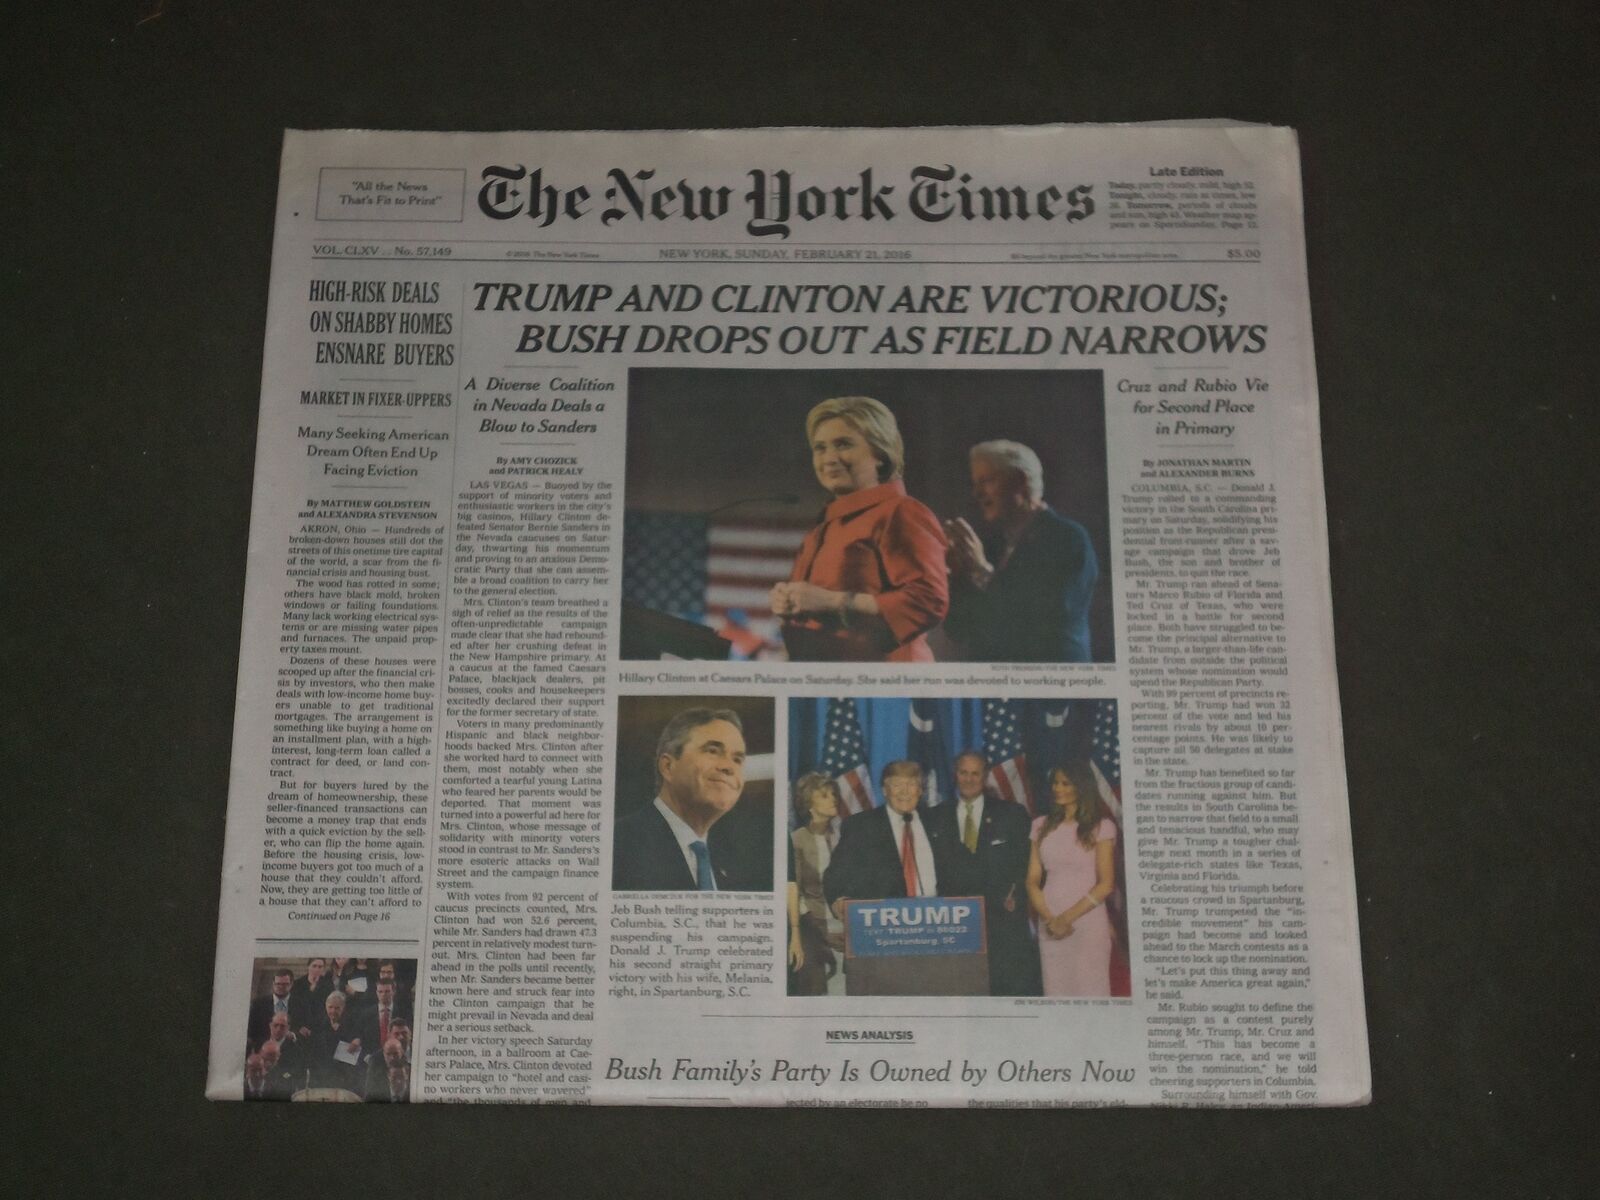 2016 FEBRUARY 21 NEW YORK TIMES-DONALD TRUMP & HILLARY CLINTON PRIMARY VICTORIES